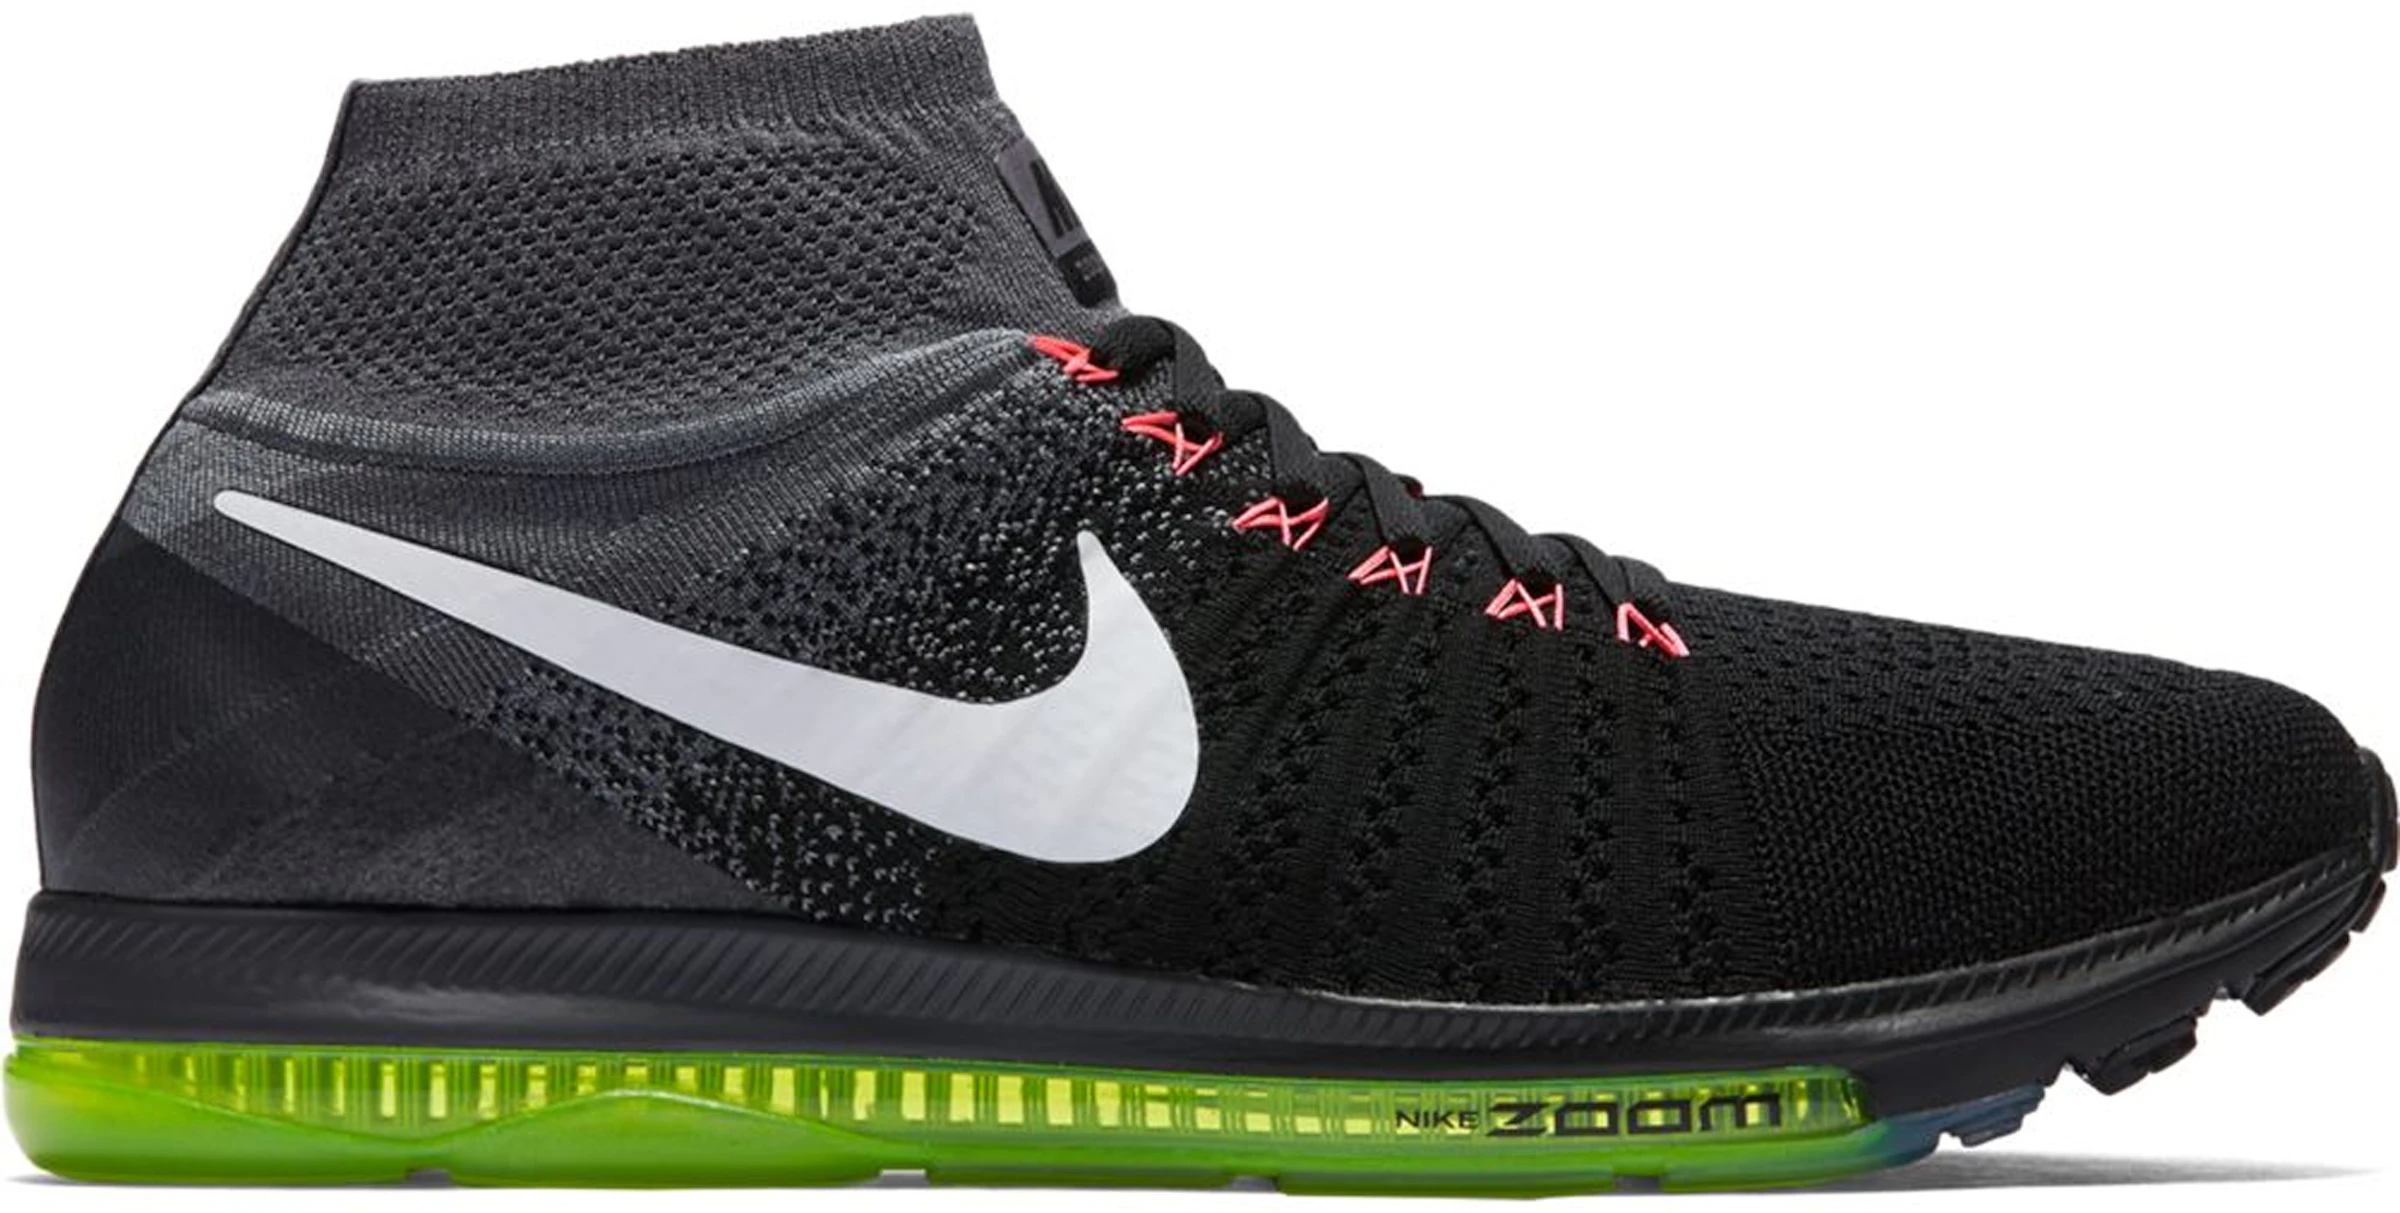 Nike Zoom All Out Flyknit Black White Volt (W) - 845361-002 ES